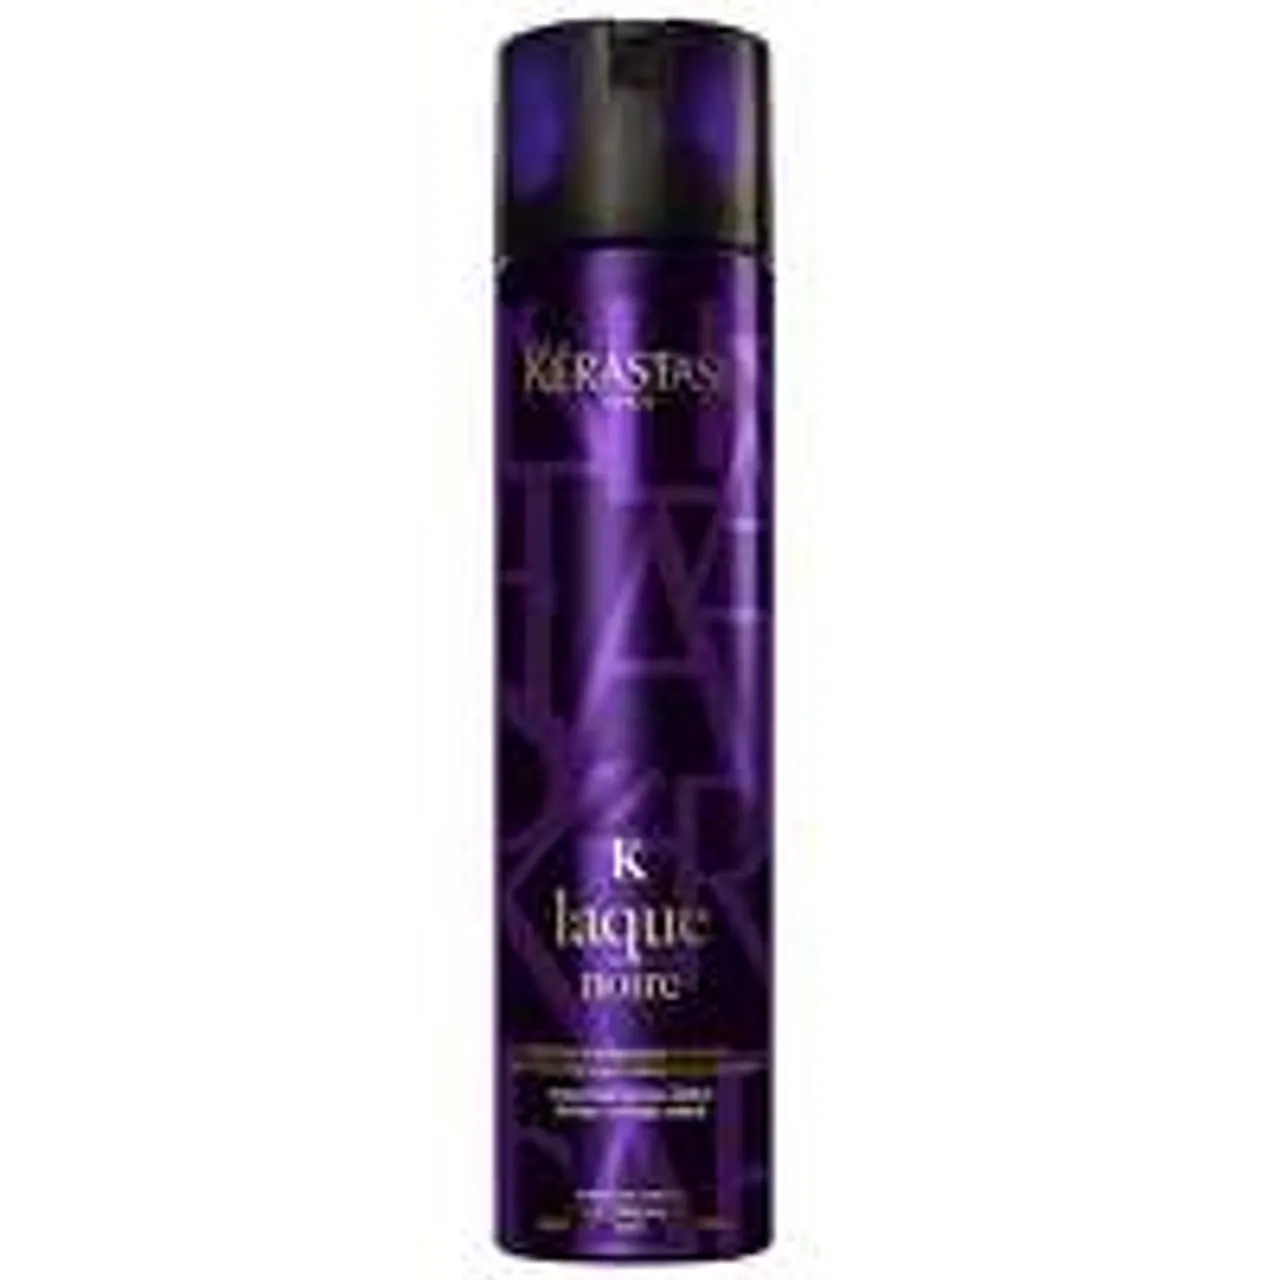 Kerastase Couture Styling Laque Noire: Extra Strong Hairspray 300ml